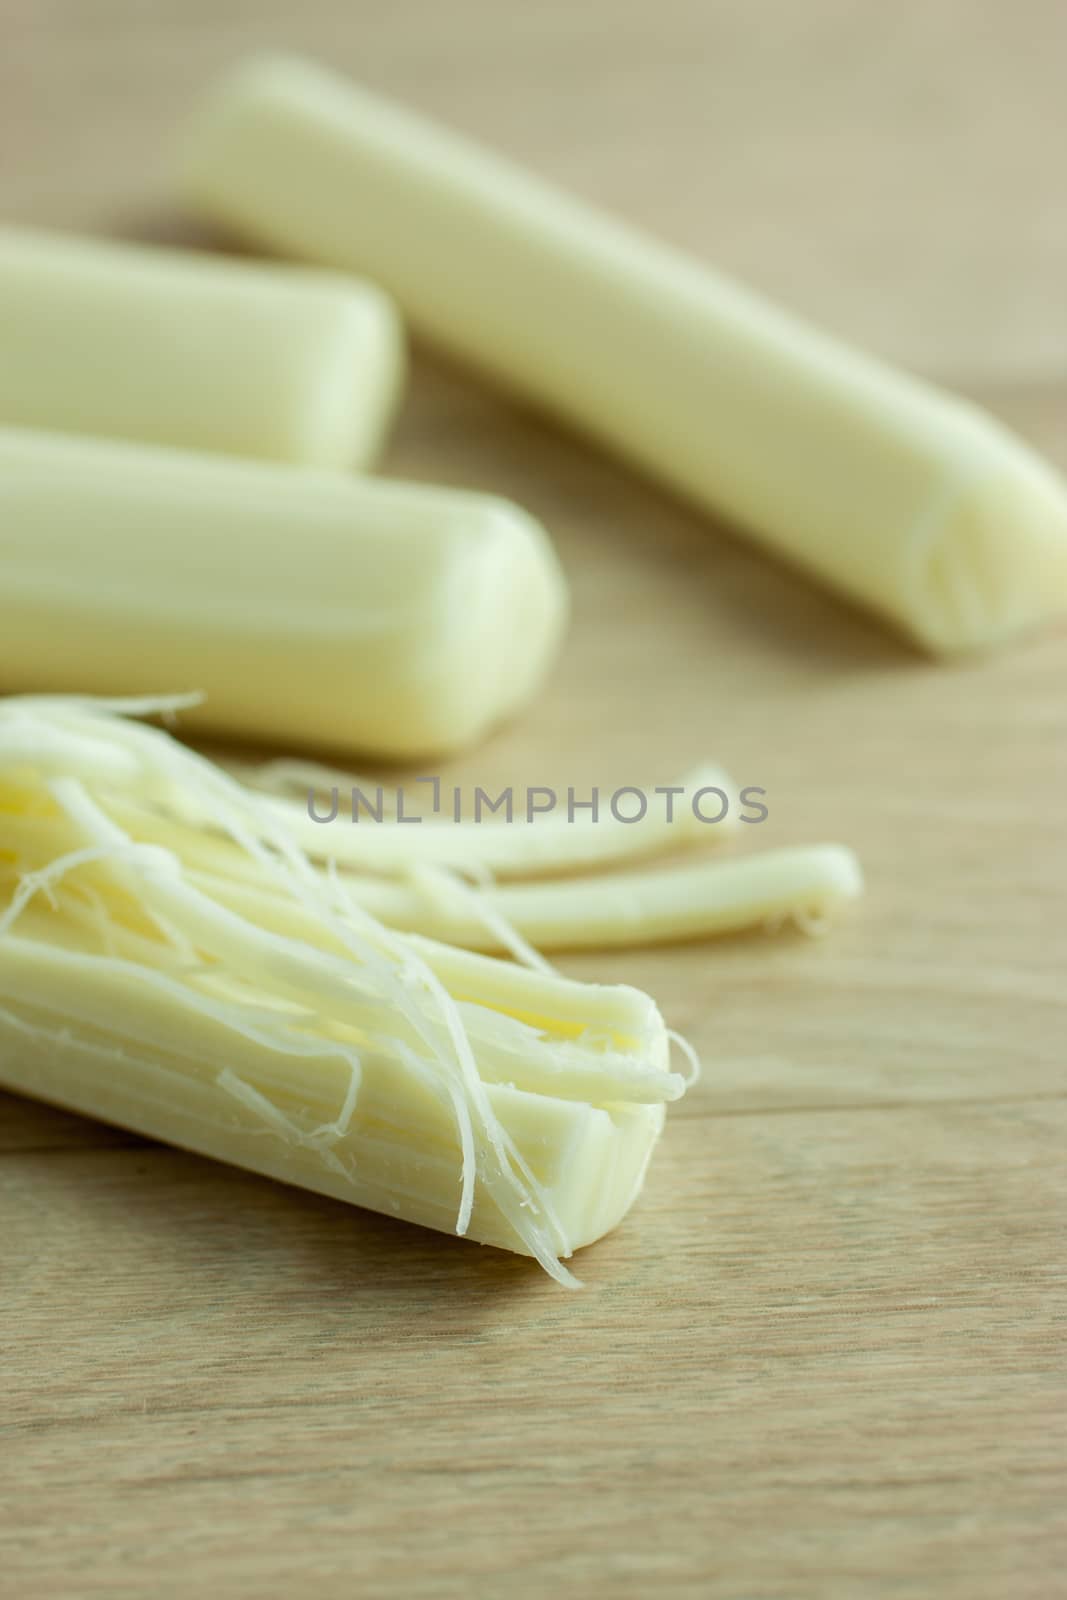 String Cheese by SouthernLightStudios